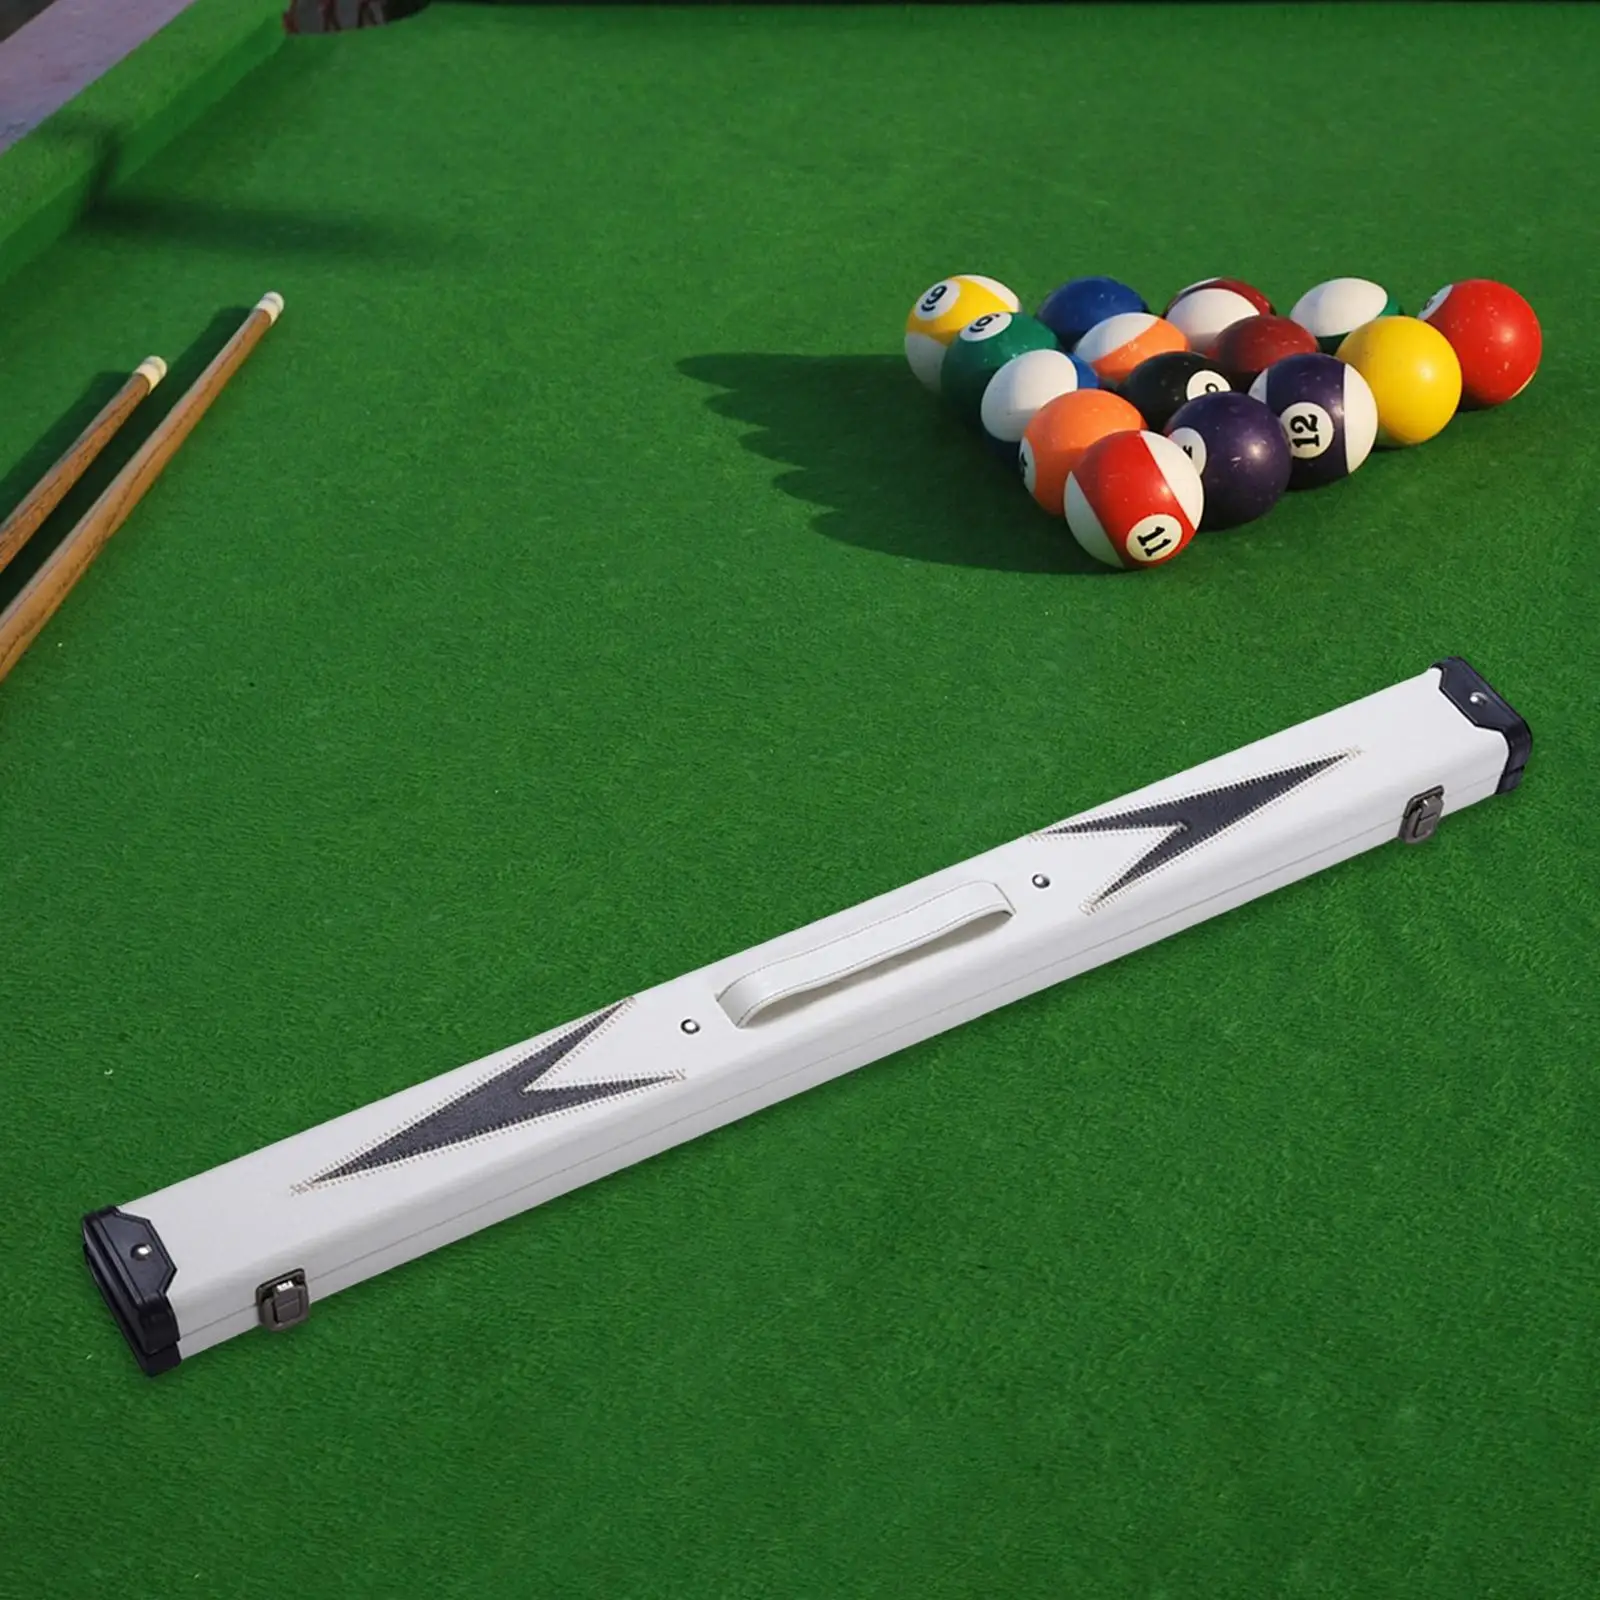 Billiards Pool Hard Case Holds Shaft Carrying Box for 1/2 Snooker